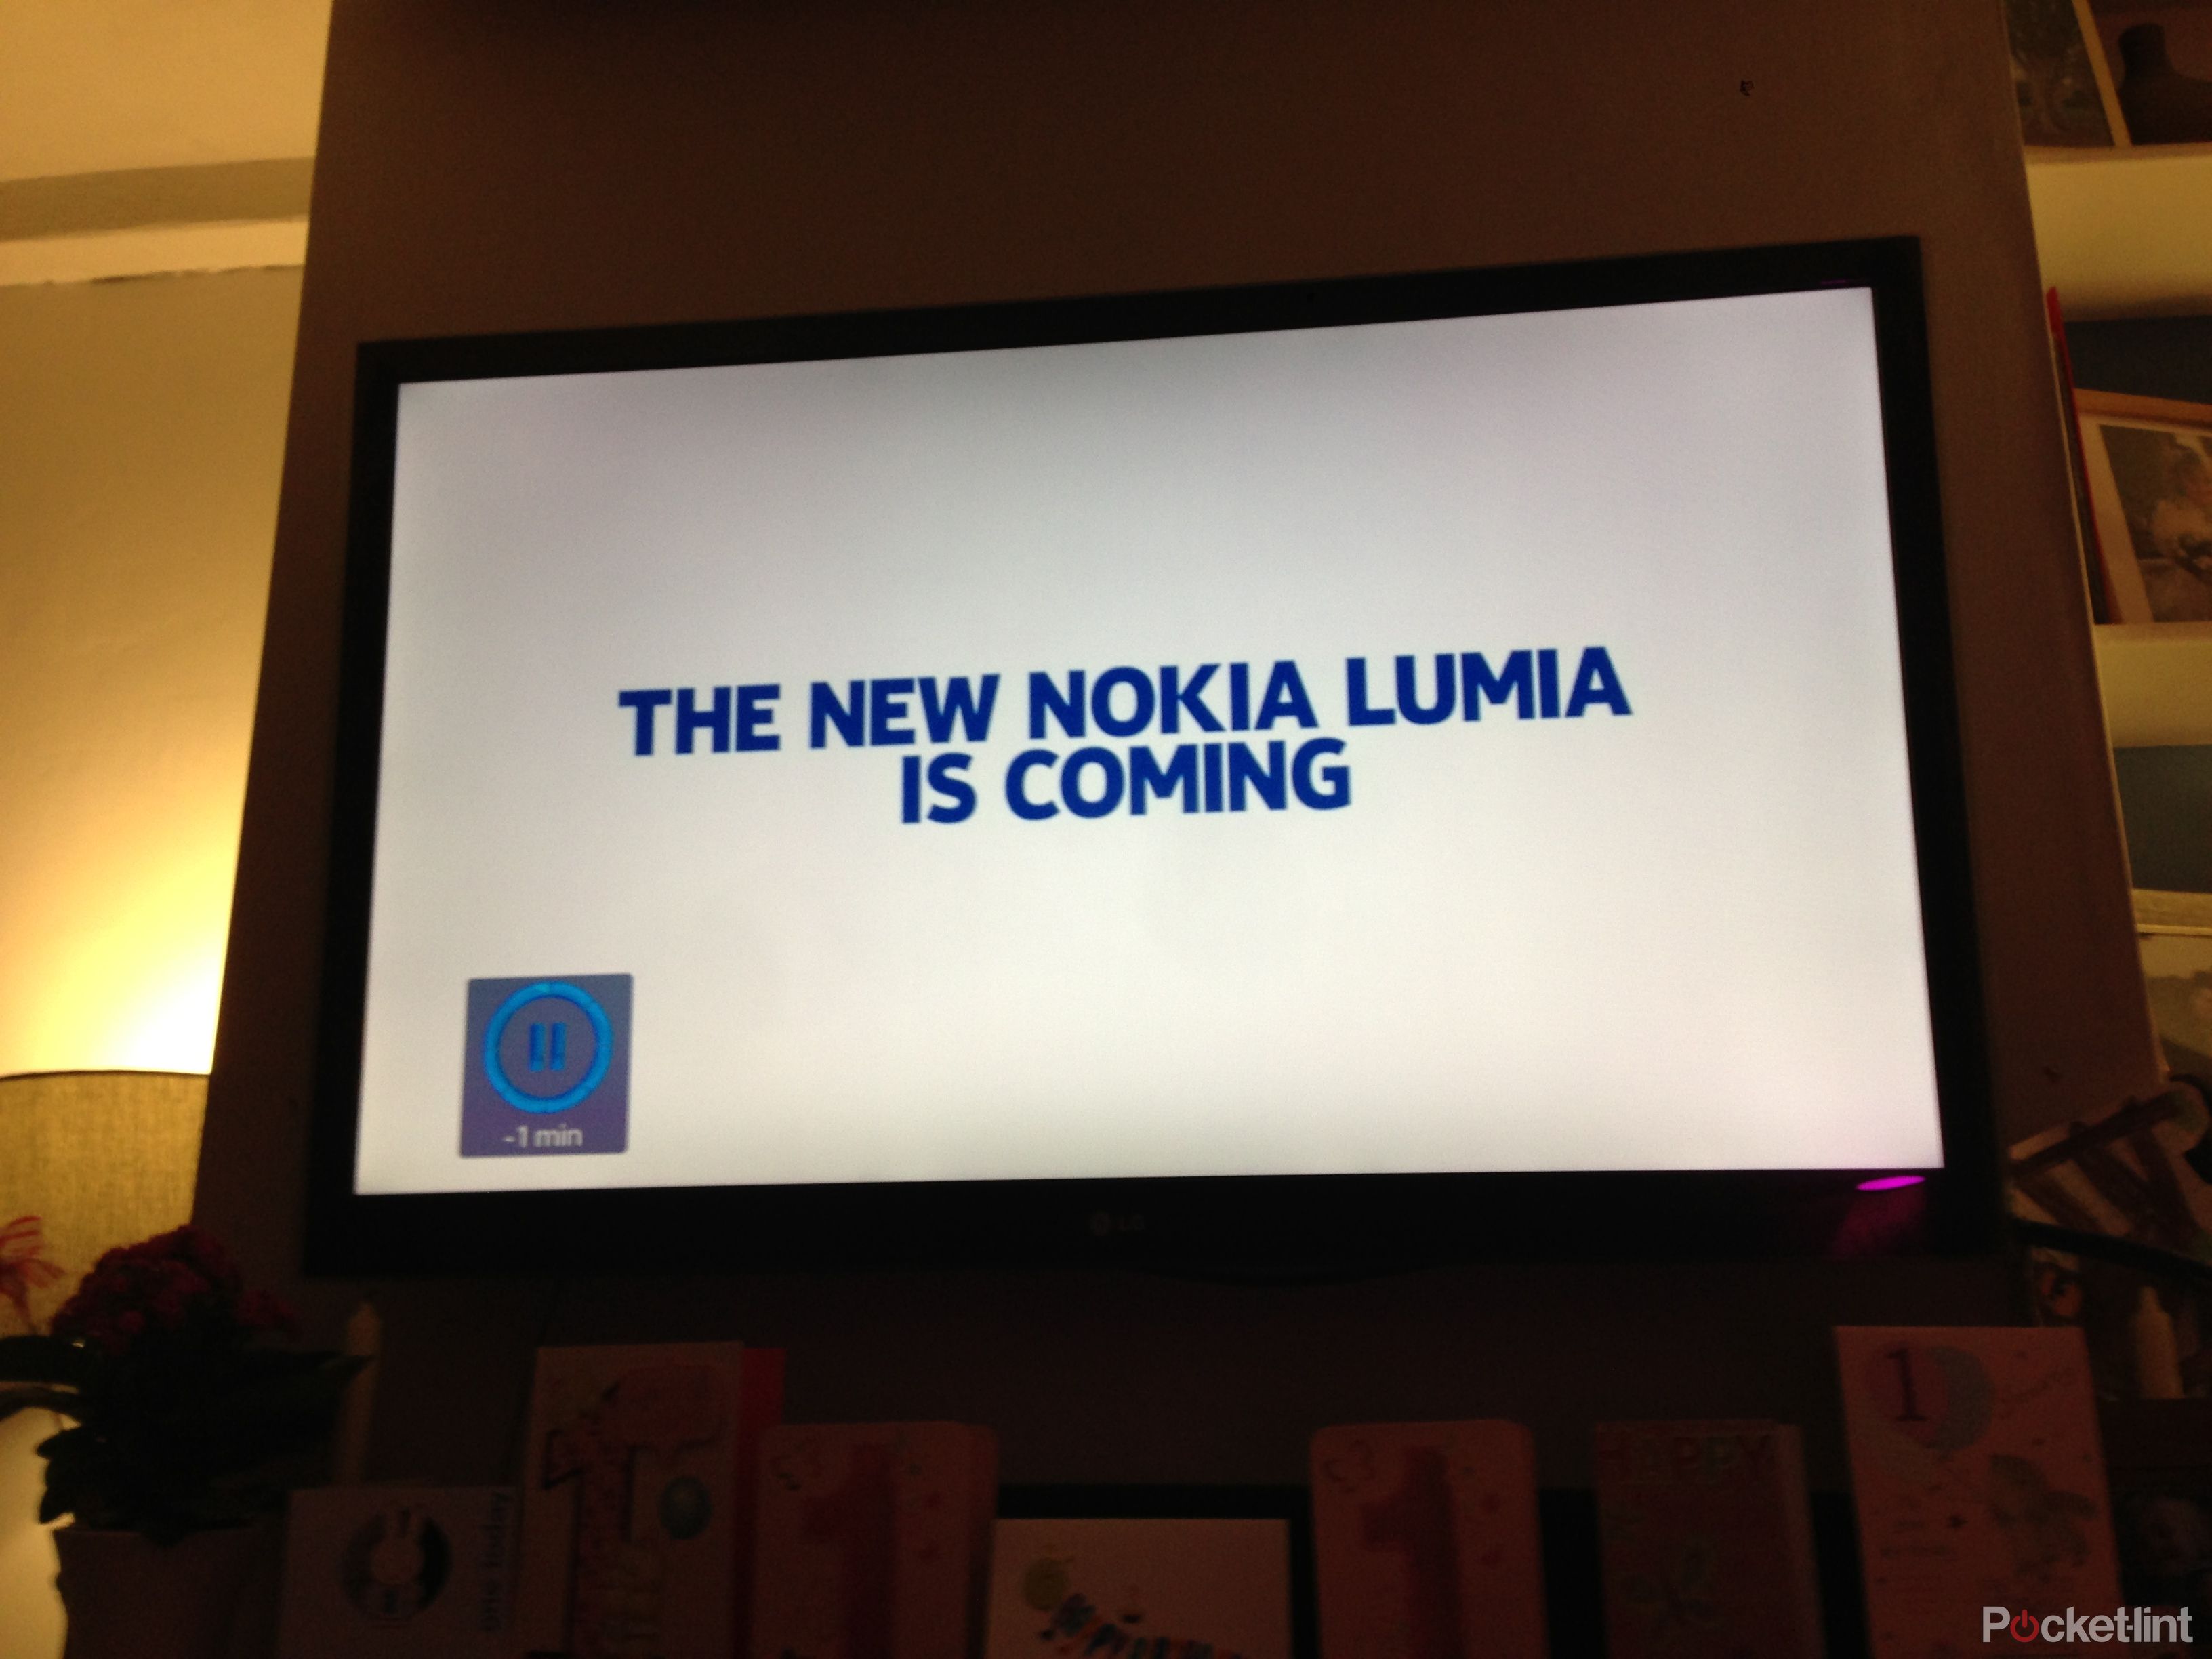 new nokia lumia teased in channel 4 advert ahead of tuesday uk reveal image 1